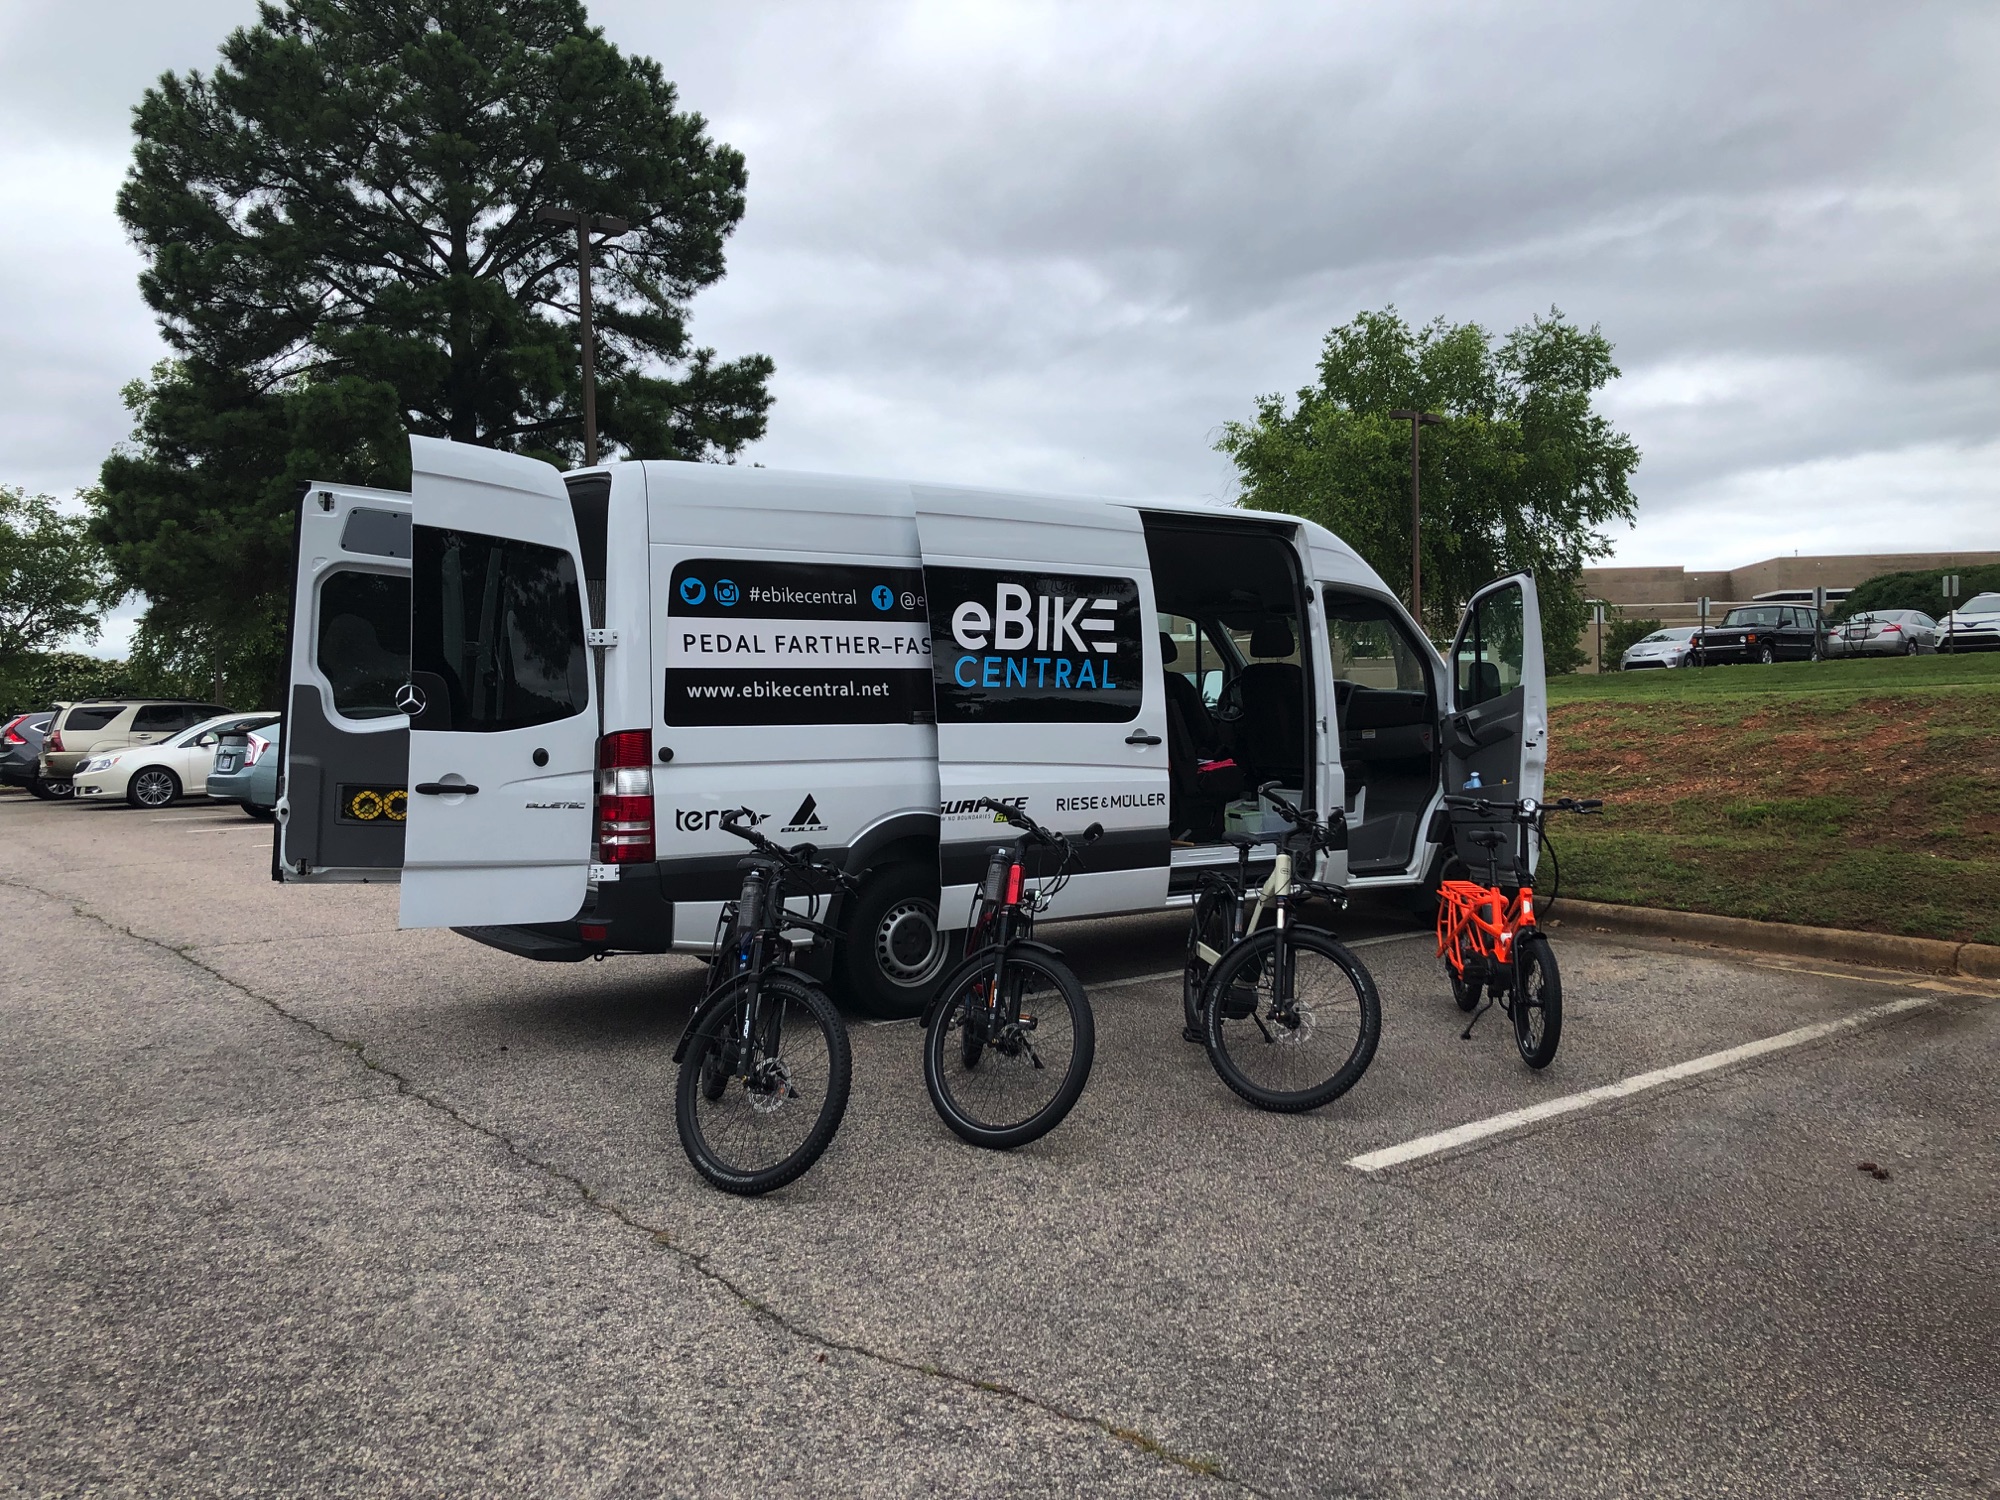 eBike Central in Raleigh NC